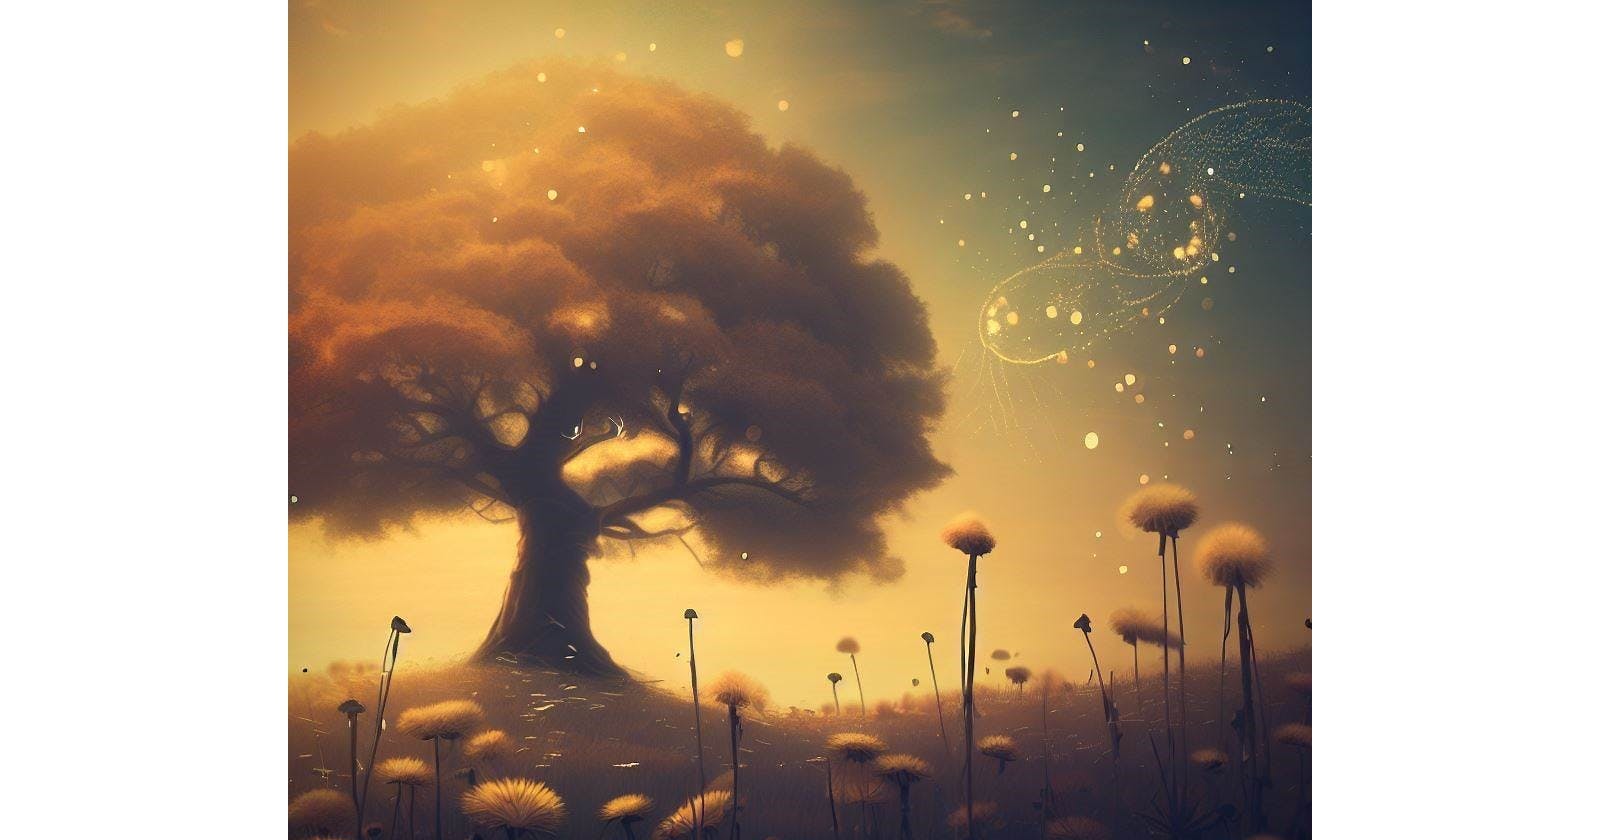 Why Do People Wish on Dandelions and Wishing Trees?